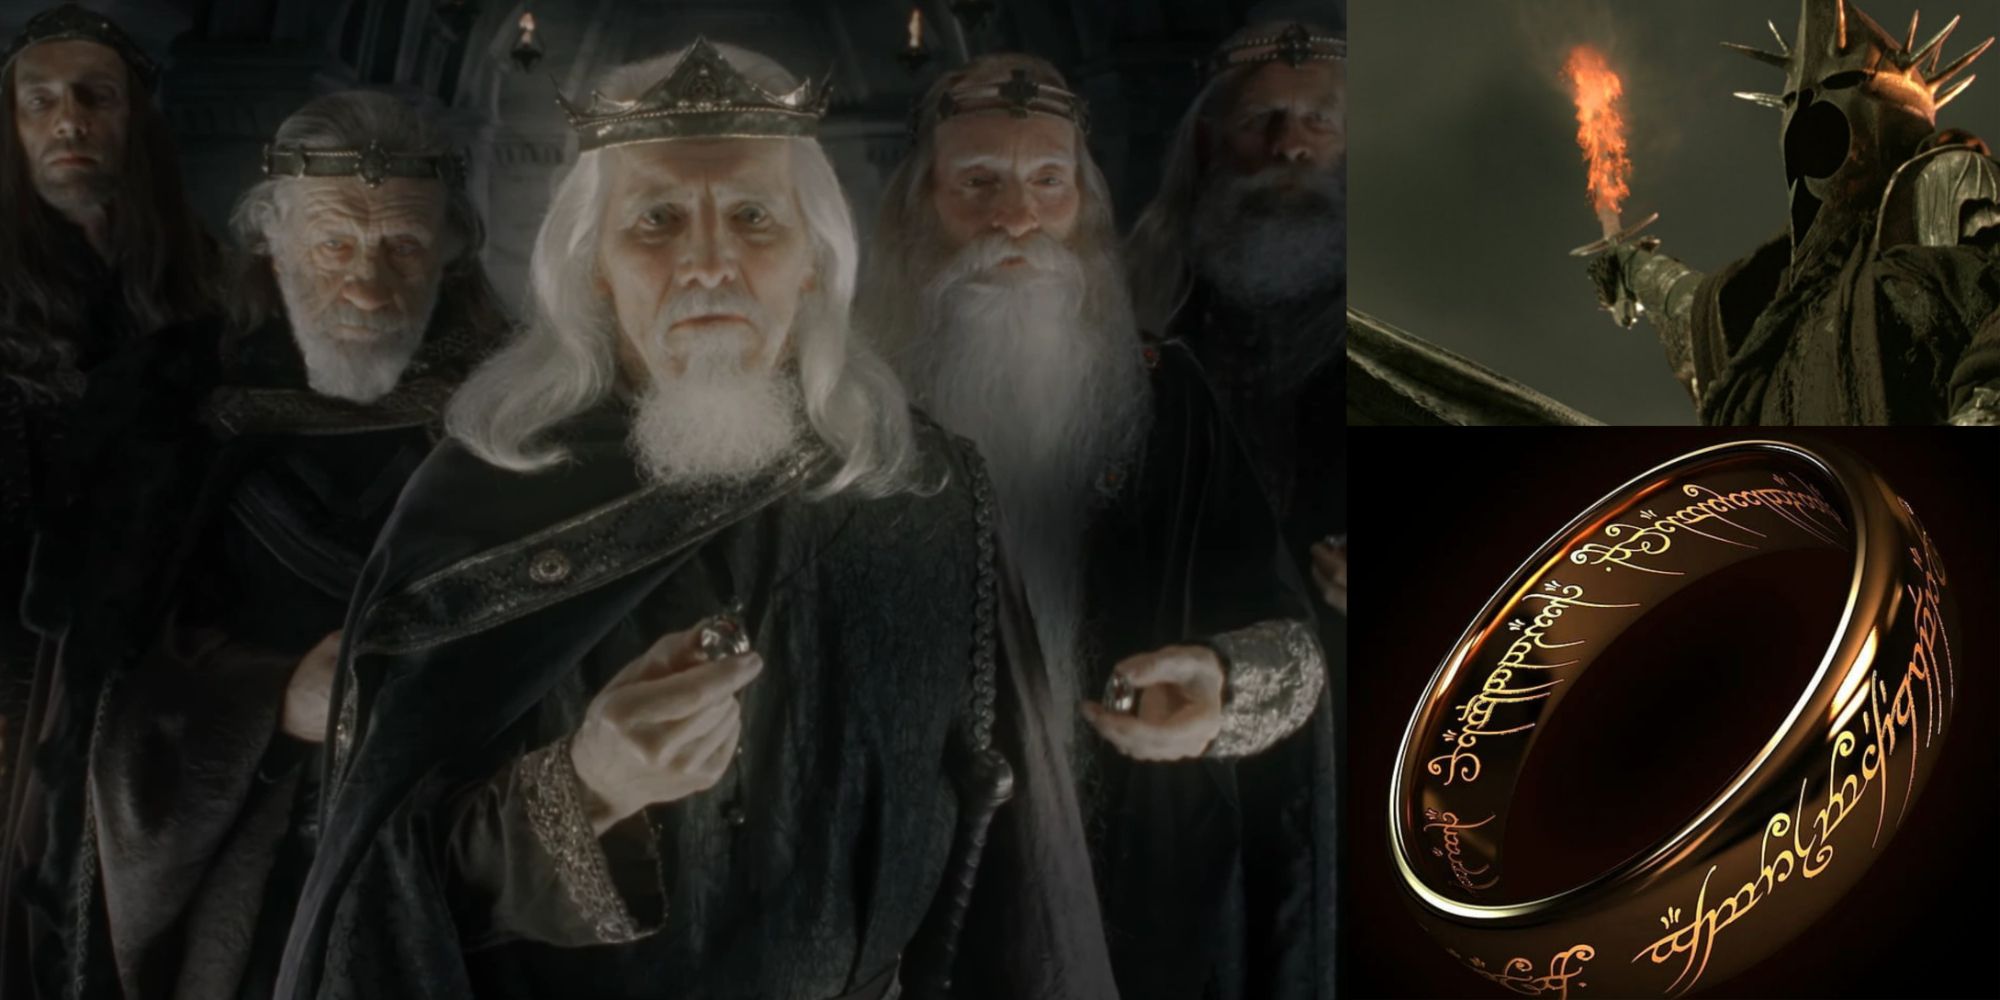 Prime Video: The Lord of the Rings: The Rings of Power - Season 1